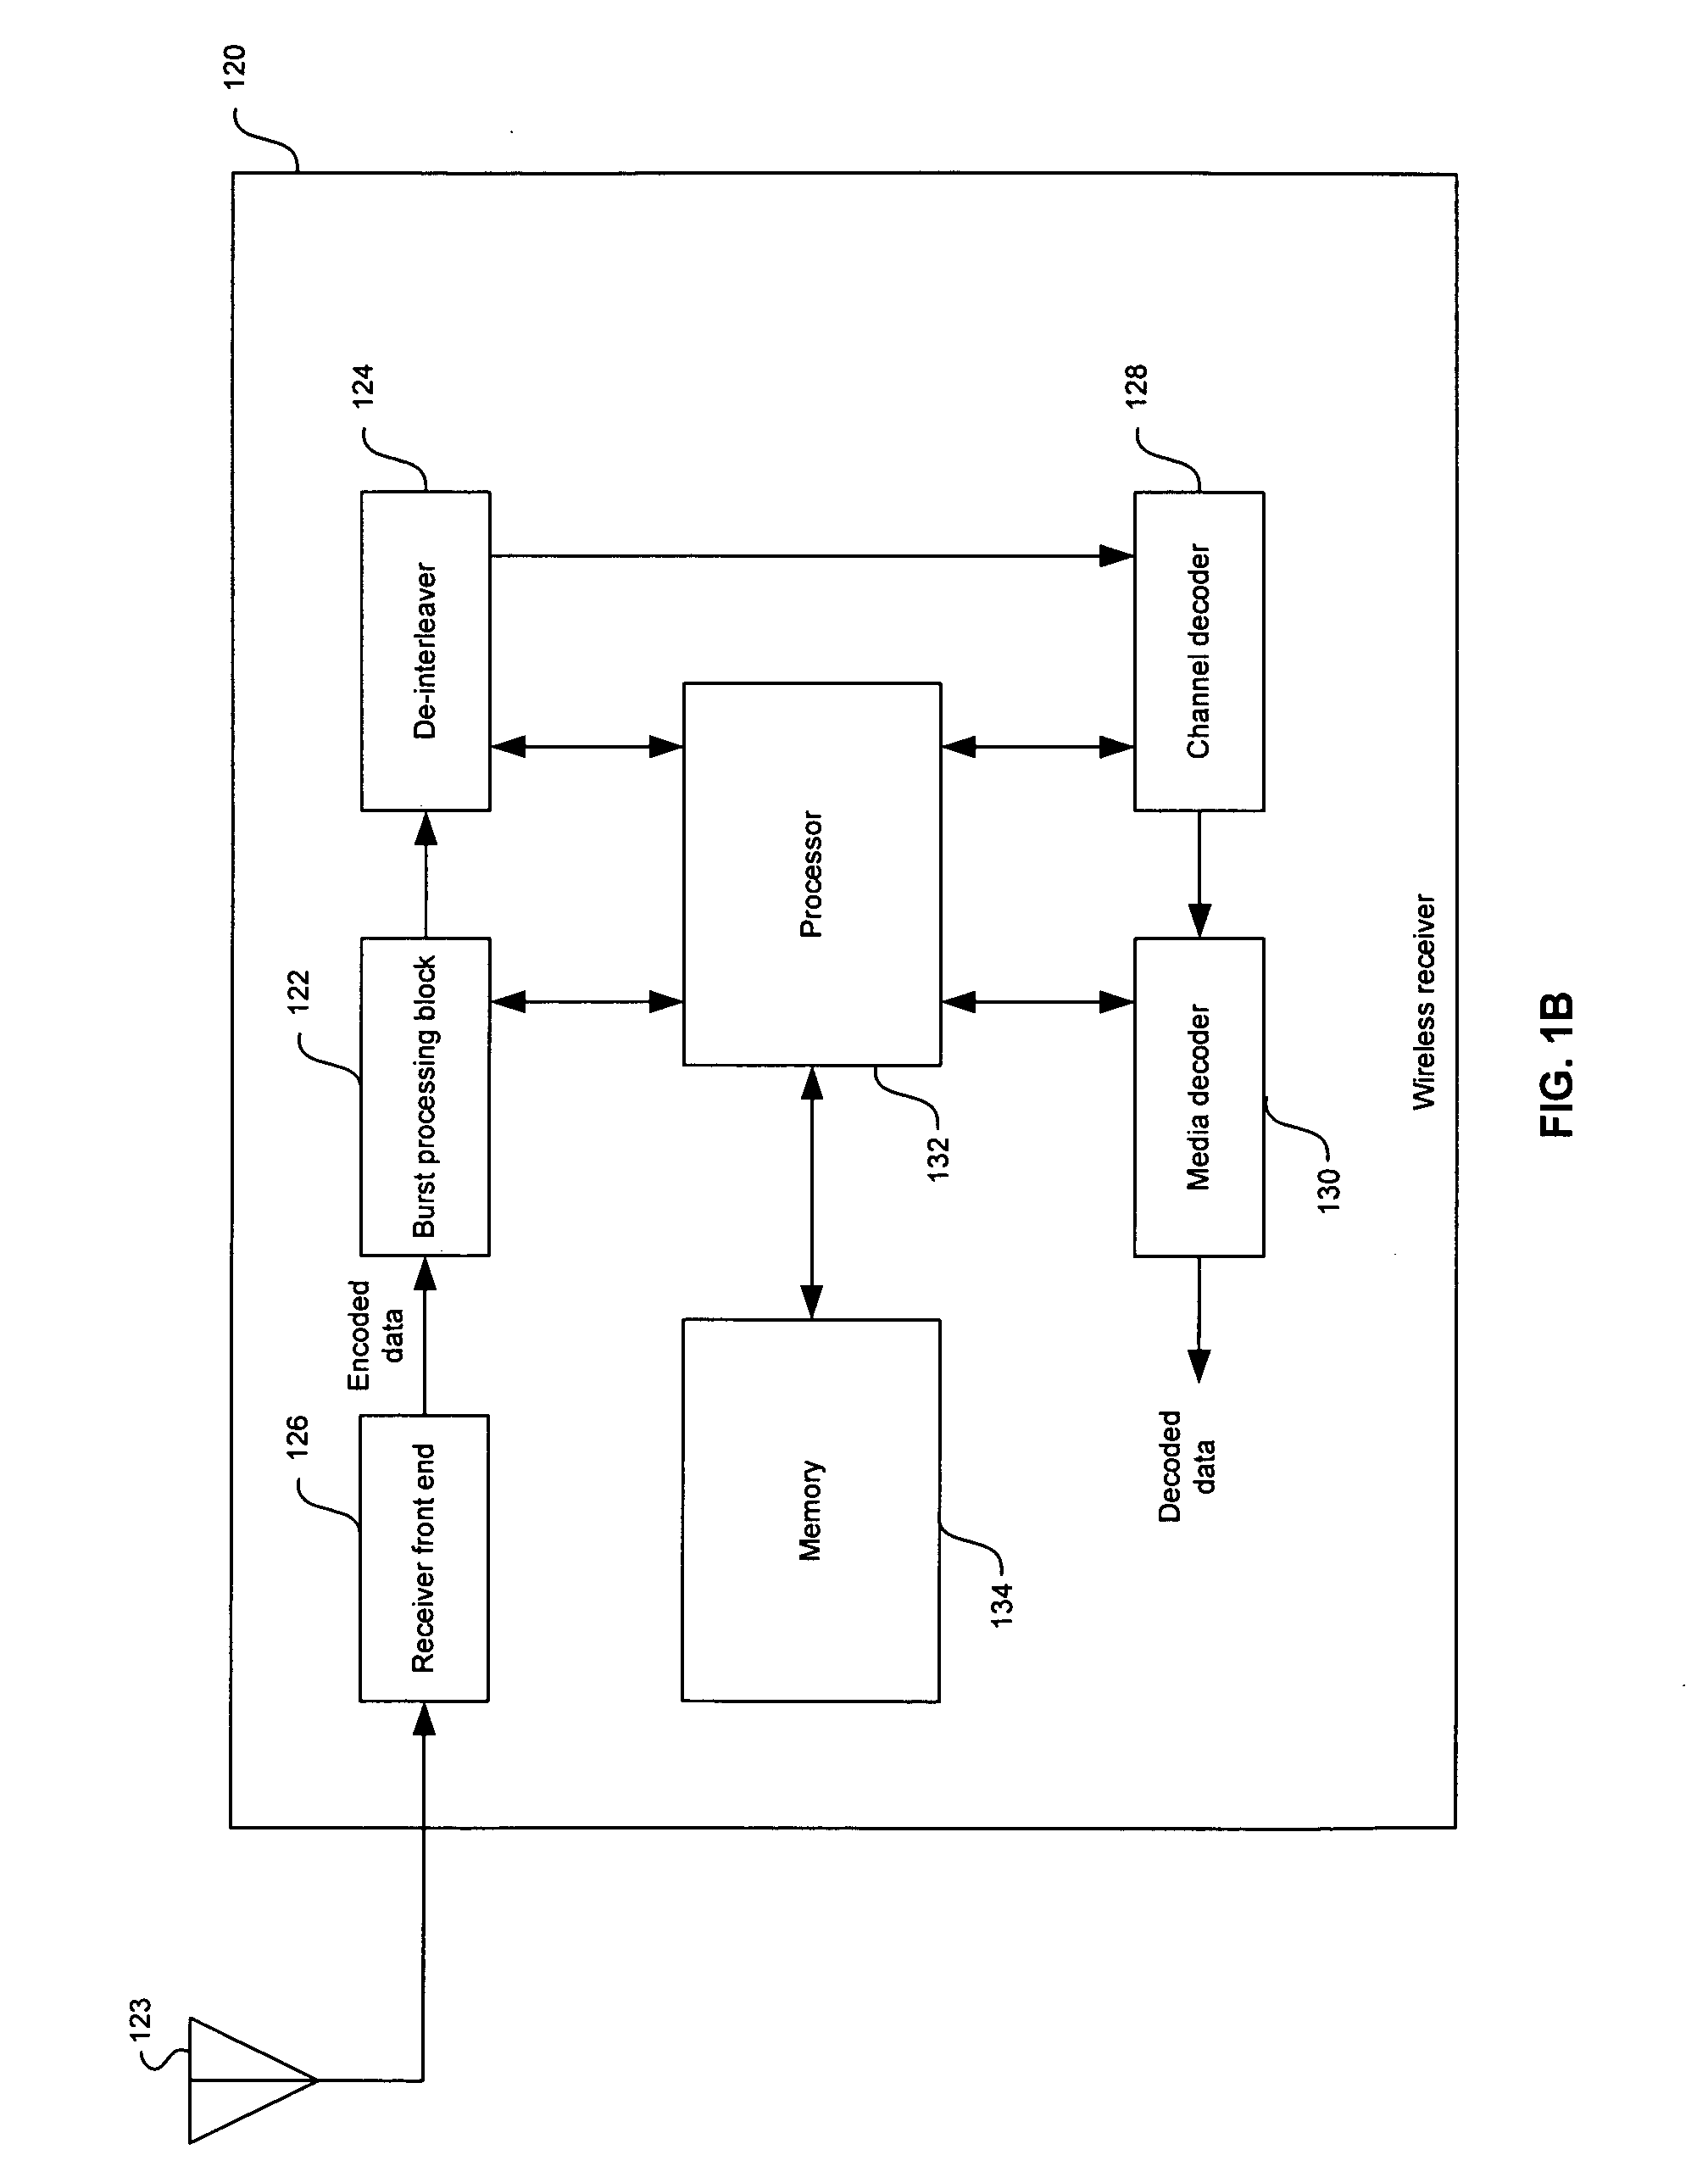 Method and system for redundancy-based decoding of voice content in a wireless LAN system